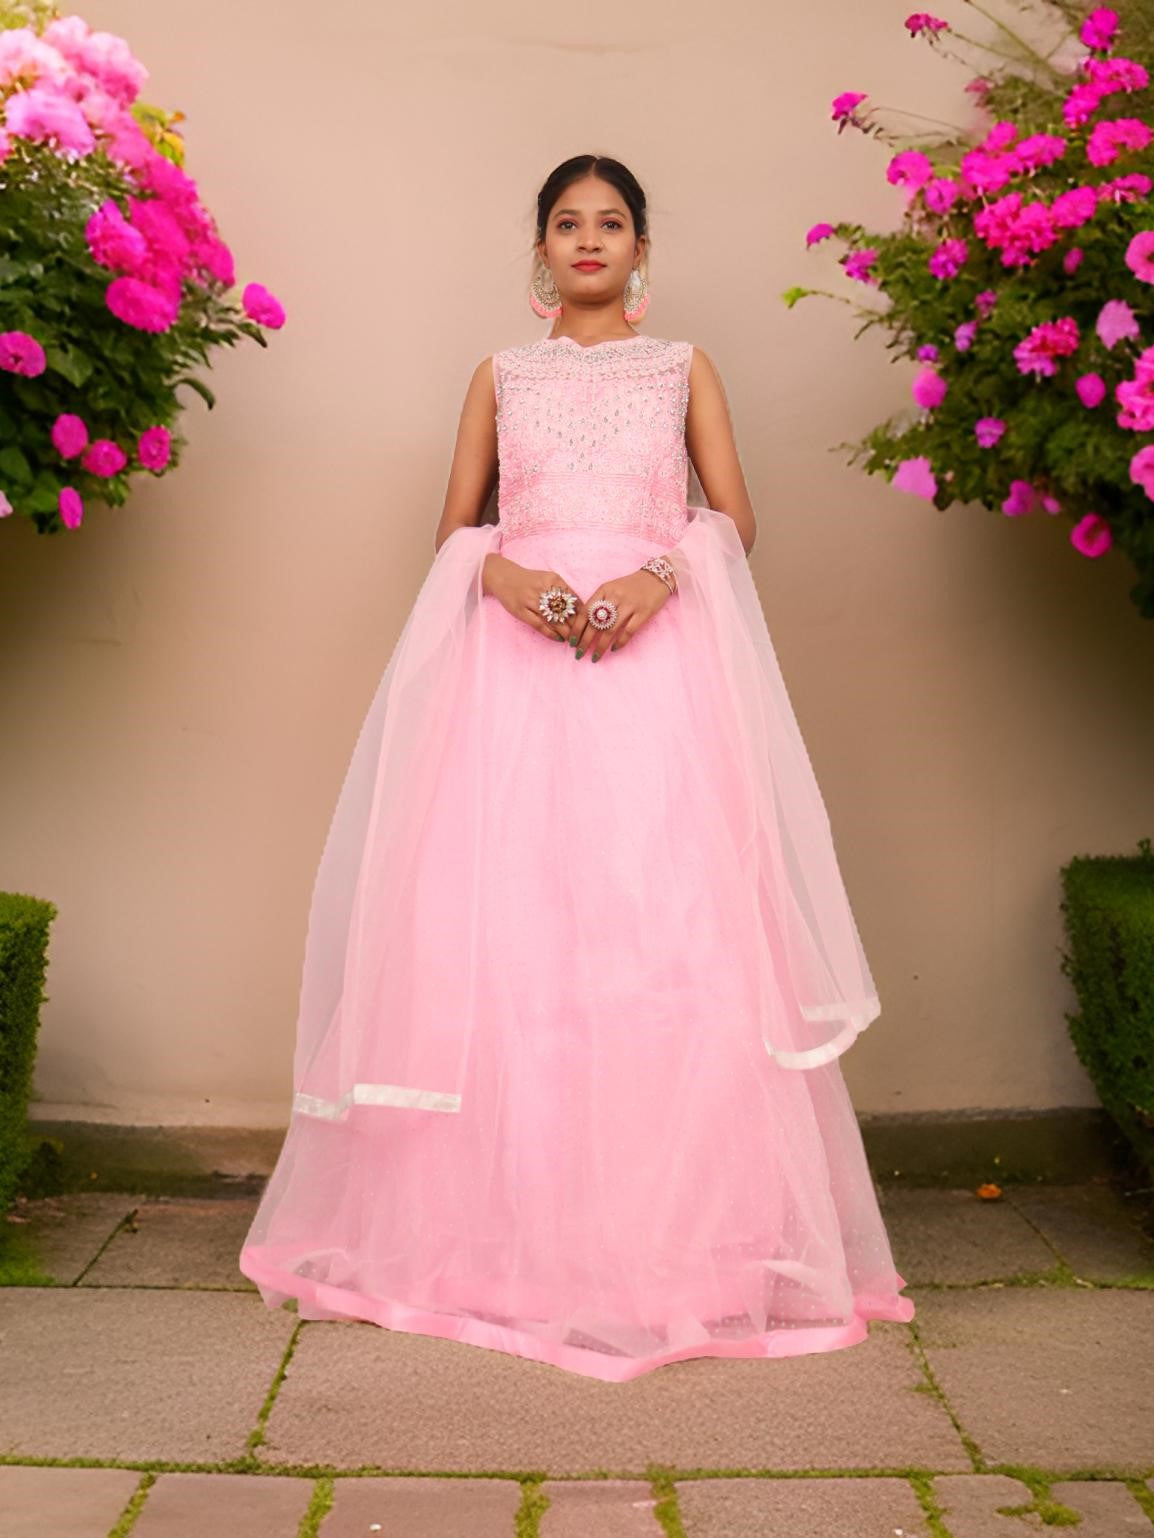 Gown with Embroidery &amp; Glitter Work by Shreekama Lemon Designer Gowns for Party Festival Wedding Occasion in Noida